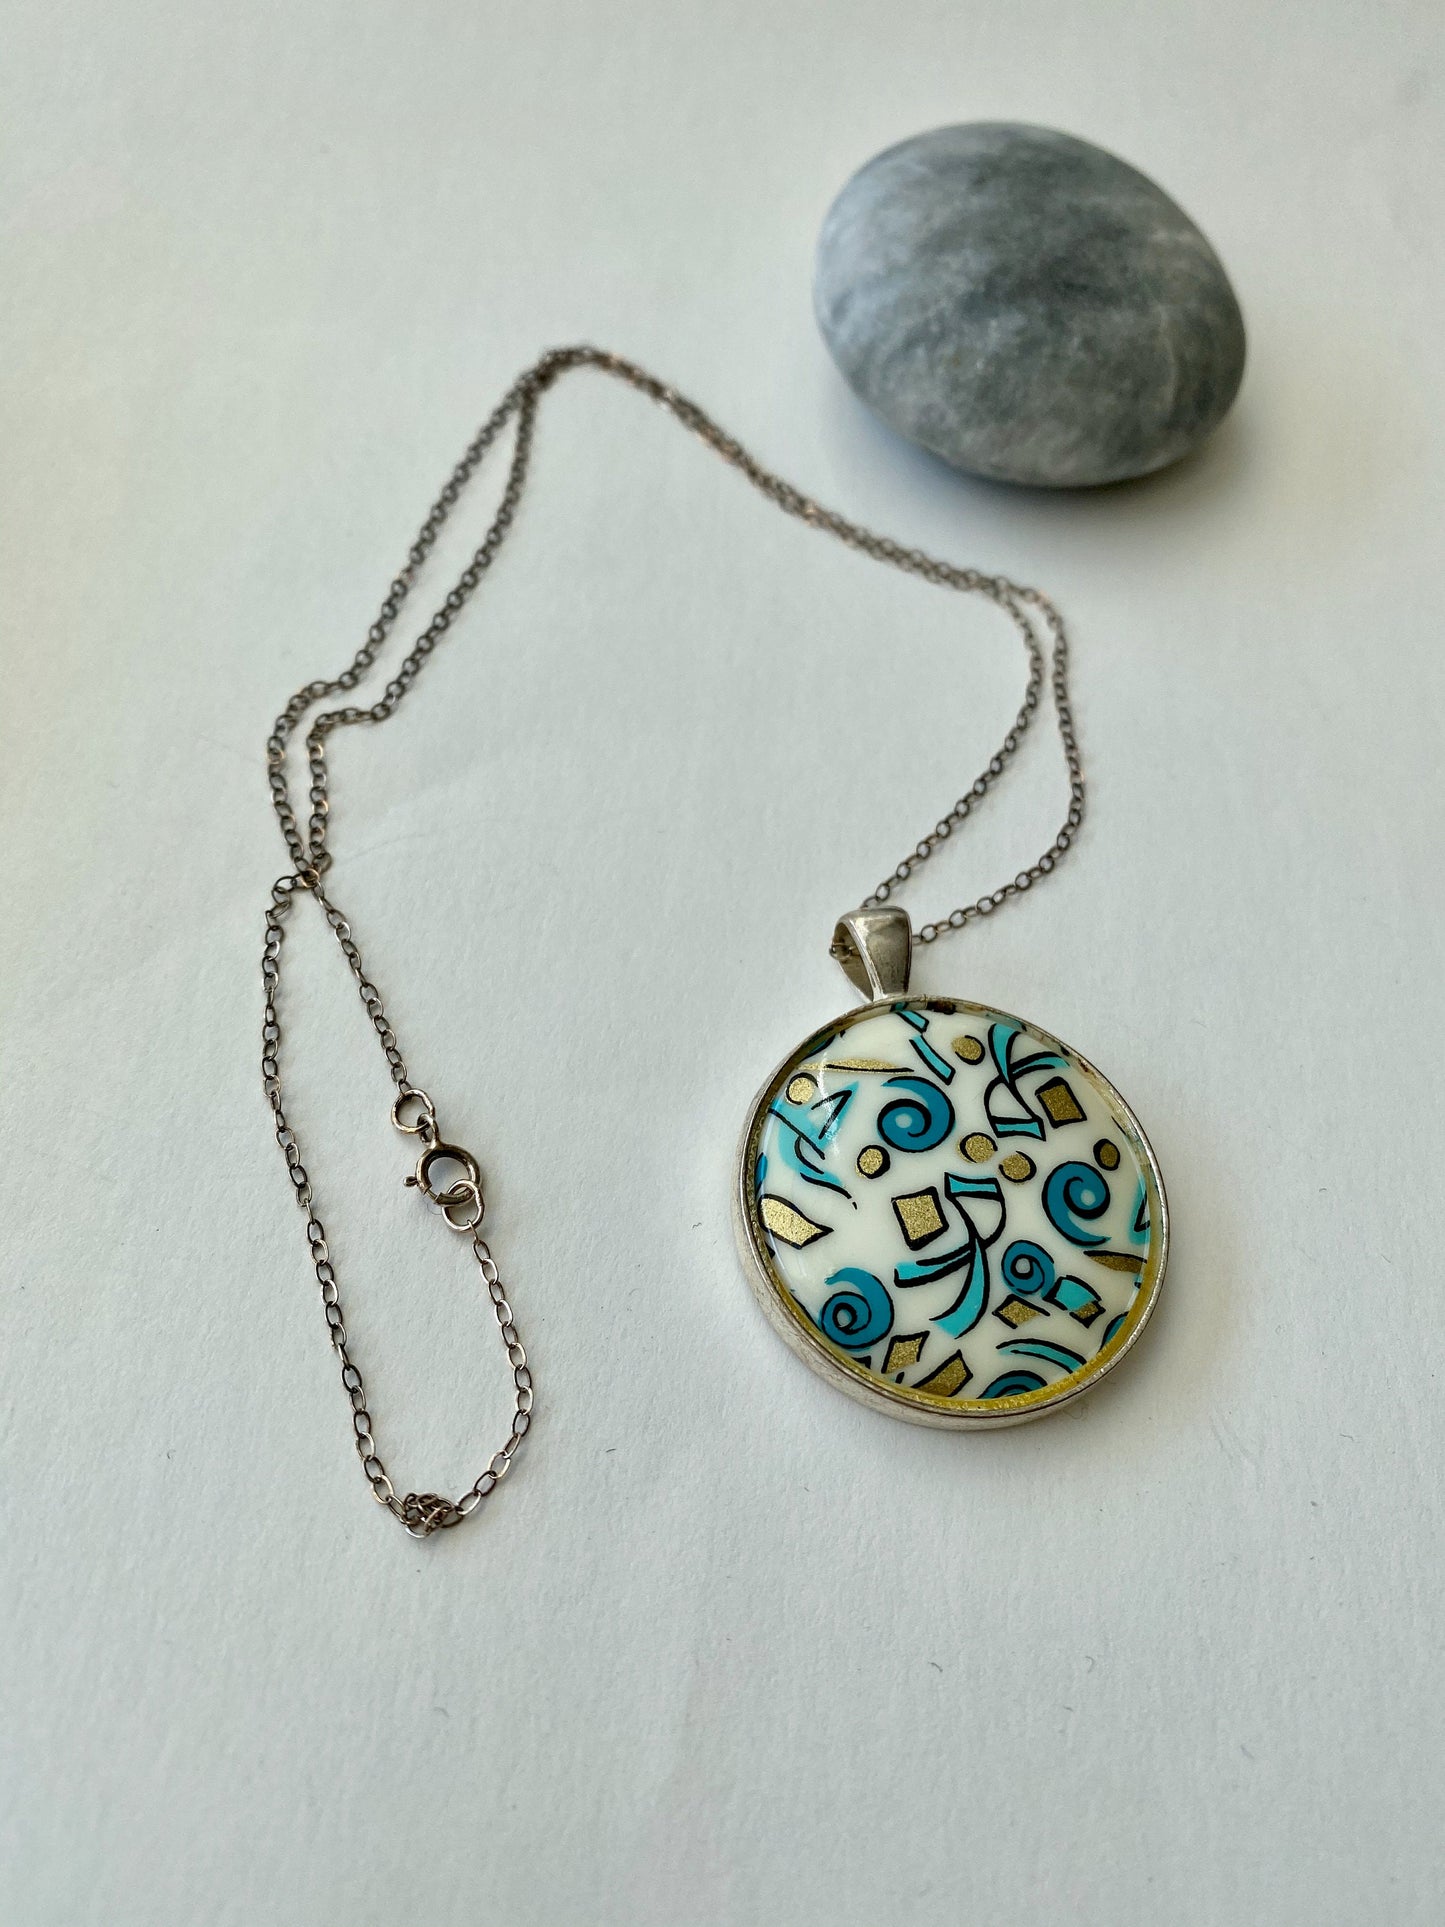 Beautiful retro look pendant.  Set in a silver bezel on a sterling silver chain. Blue and gold fun design.